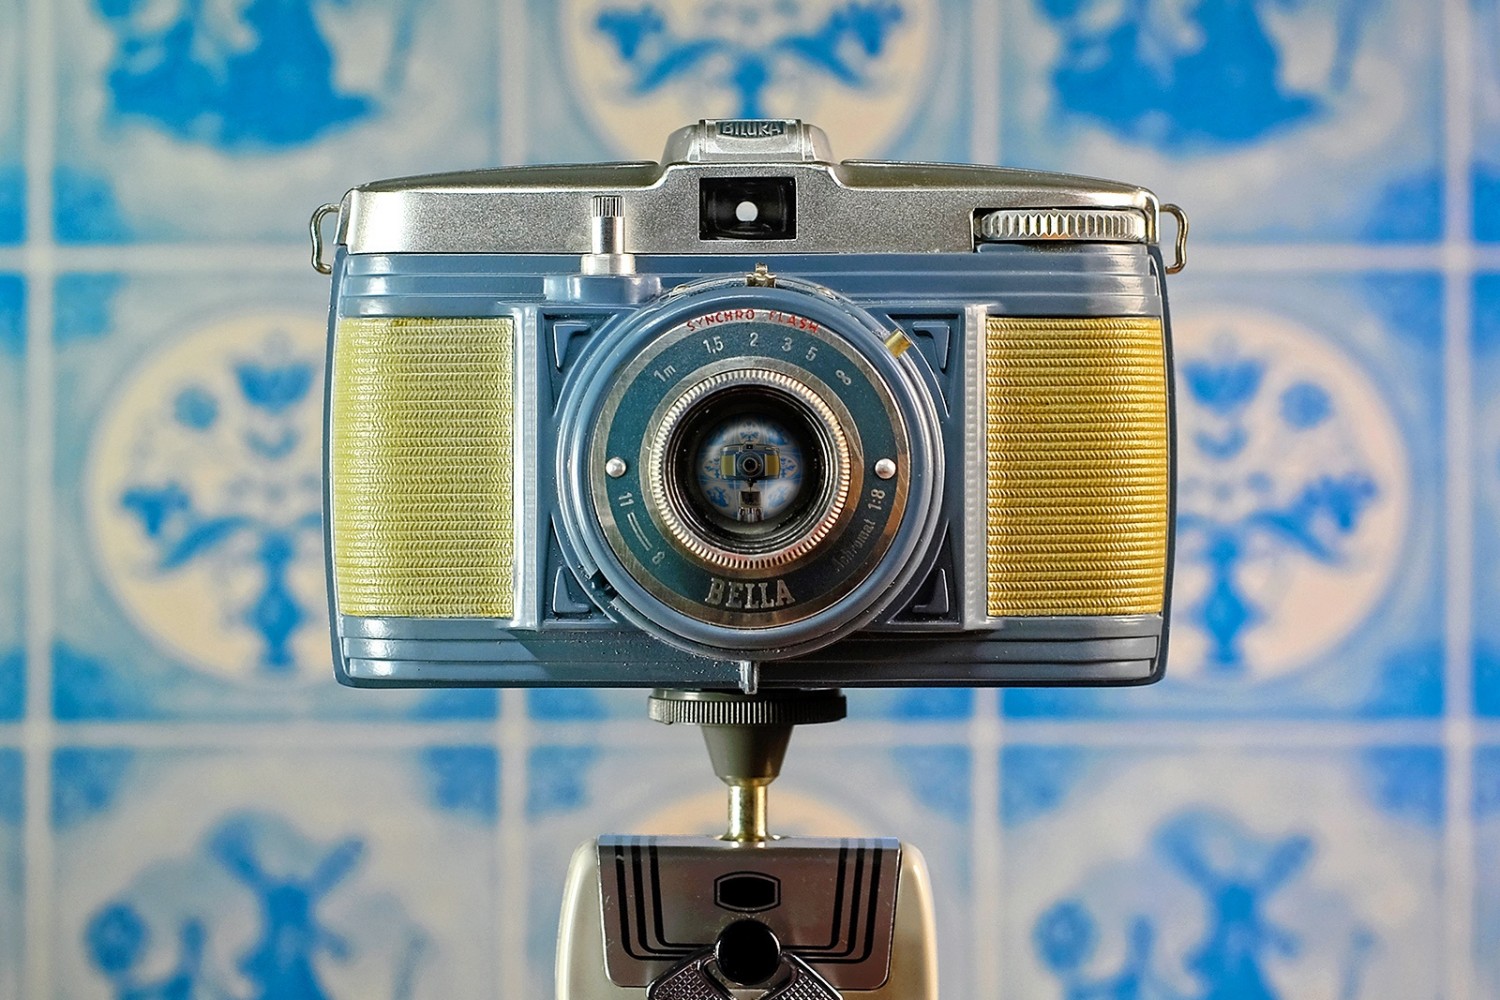 CameraSelfies: Vintage Cameras Join the Selfie Craze in Quirky 'Self-Portrait' Project